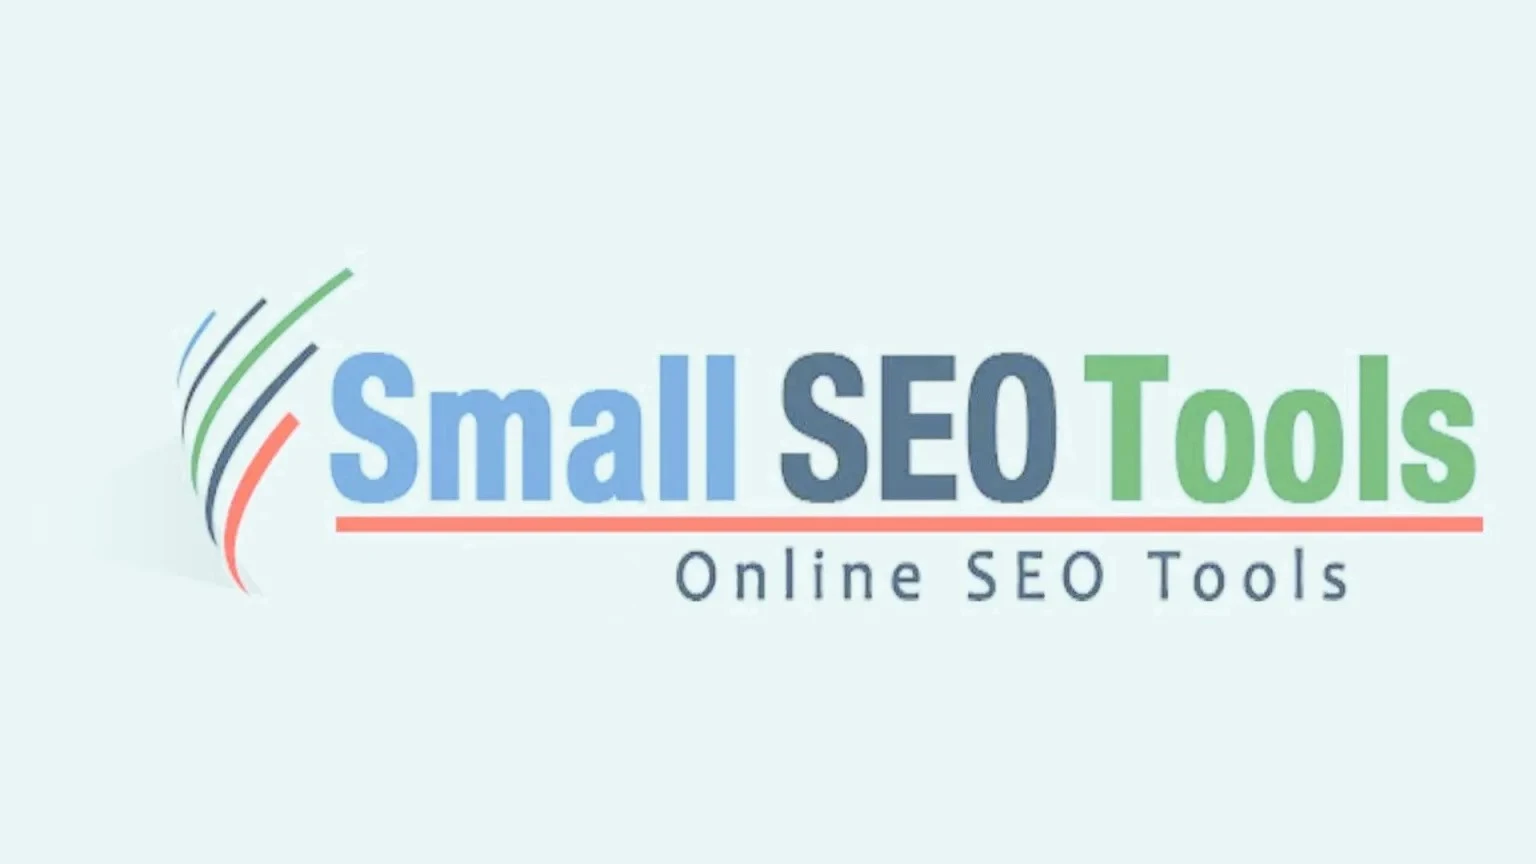 Best SEO Software for Small Businesses SEO Small Tools Software Platform